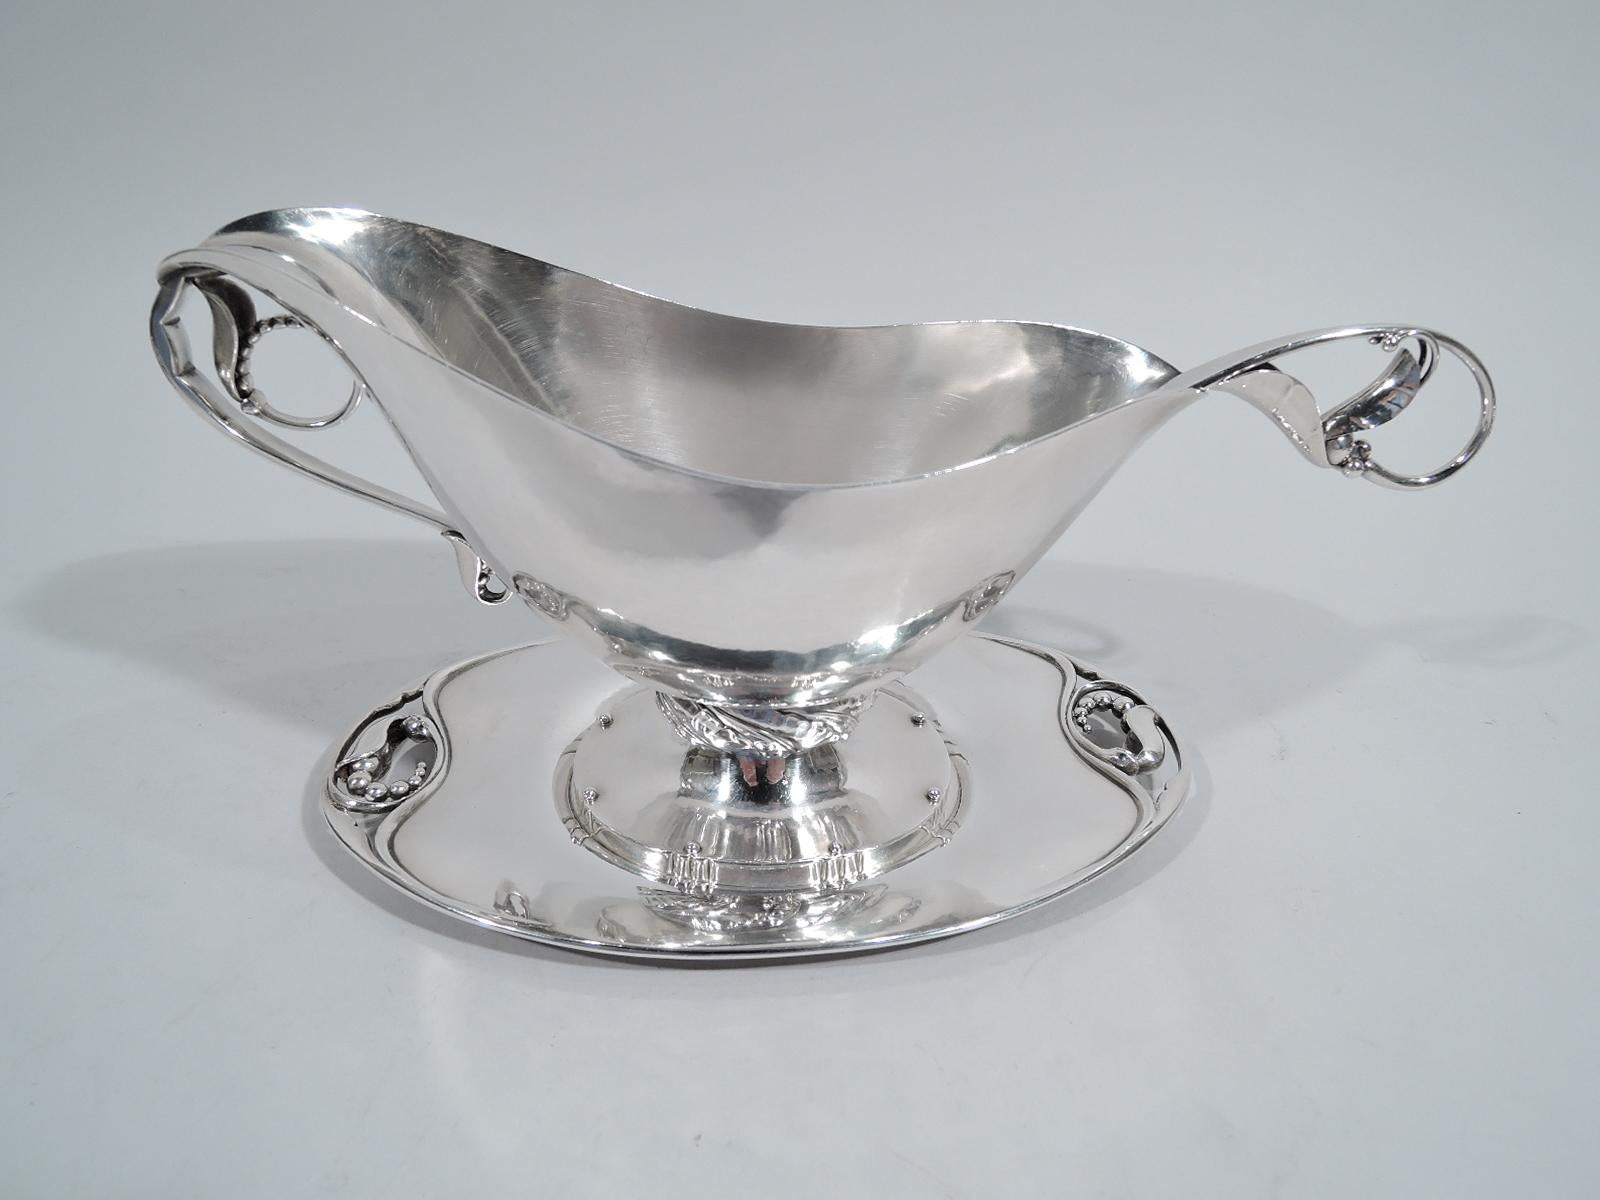 Art nouveau hand-hammered sterling silver gravy boat on stand. Made by Georg Jensen in Denmark. Boat with lip spout, thumb rest and scroll hand with rinceaux-style seed-and-leaf finger ring. Tooled and tubular support on raised oval foot with tooled